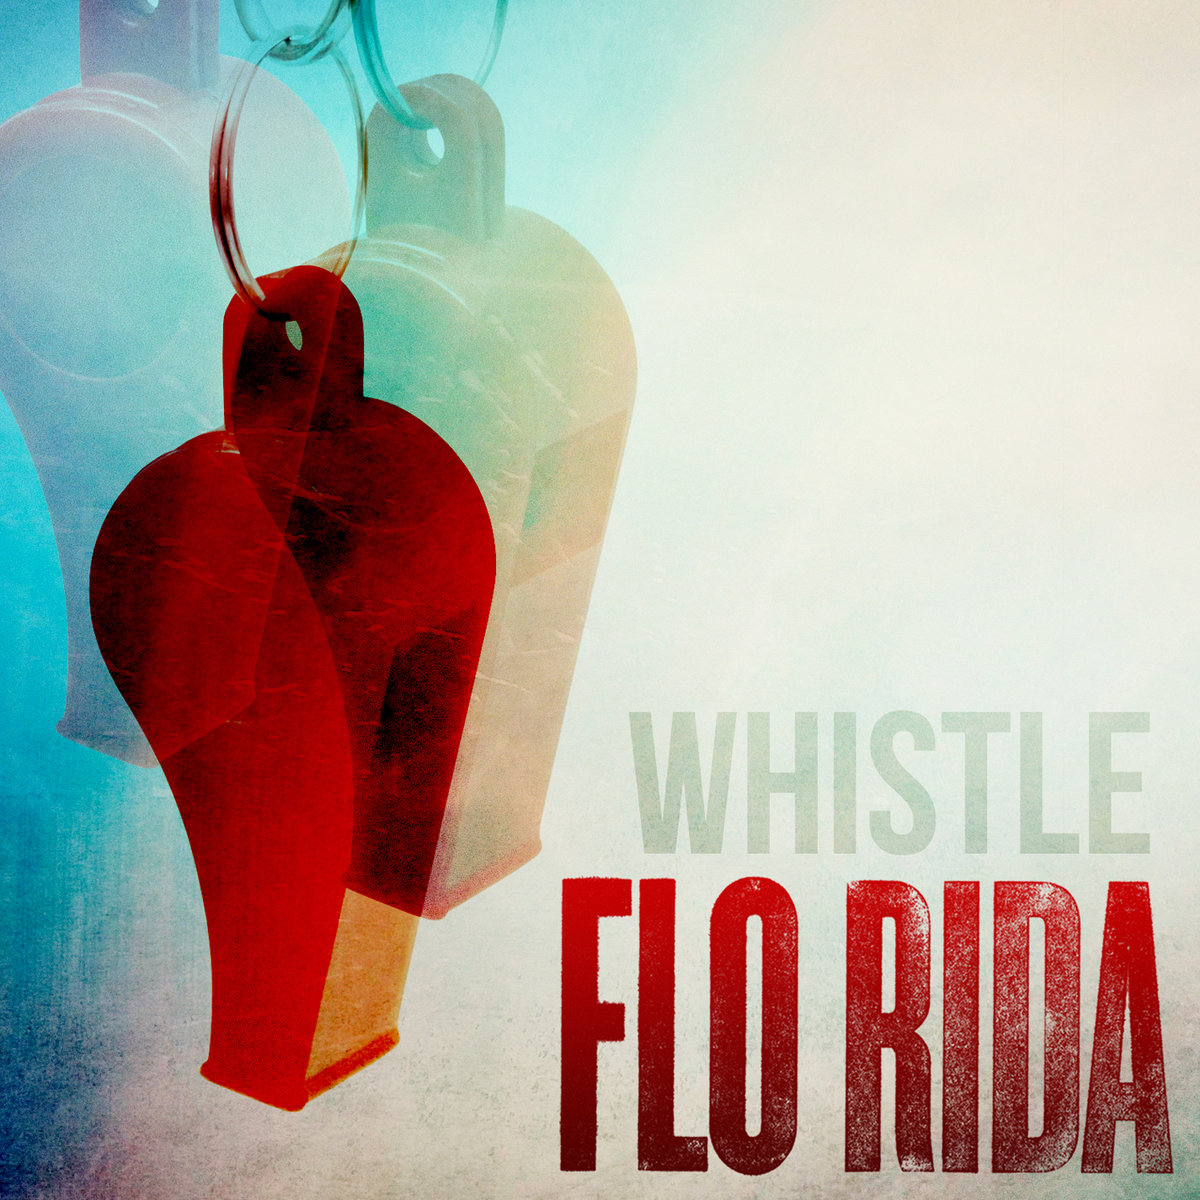 Whistle flo rida meaning